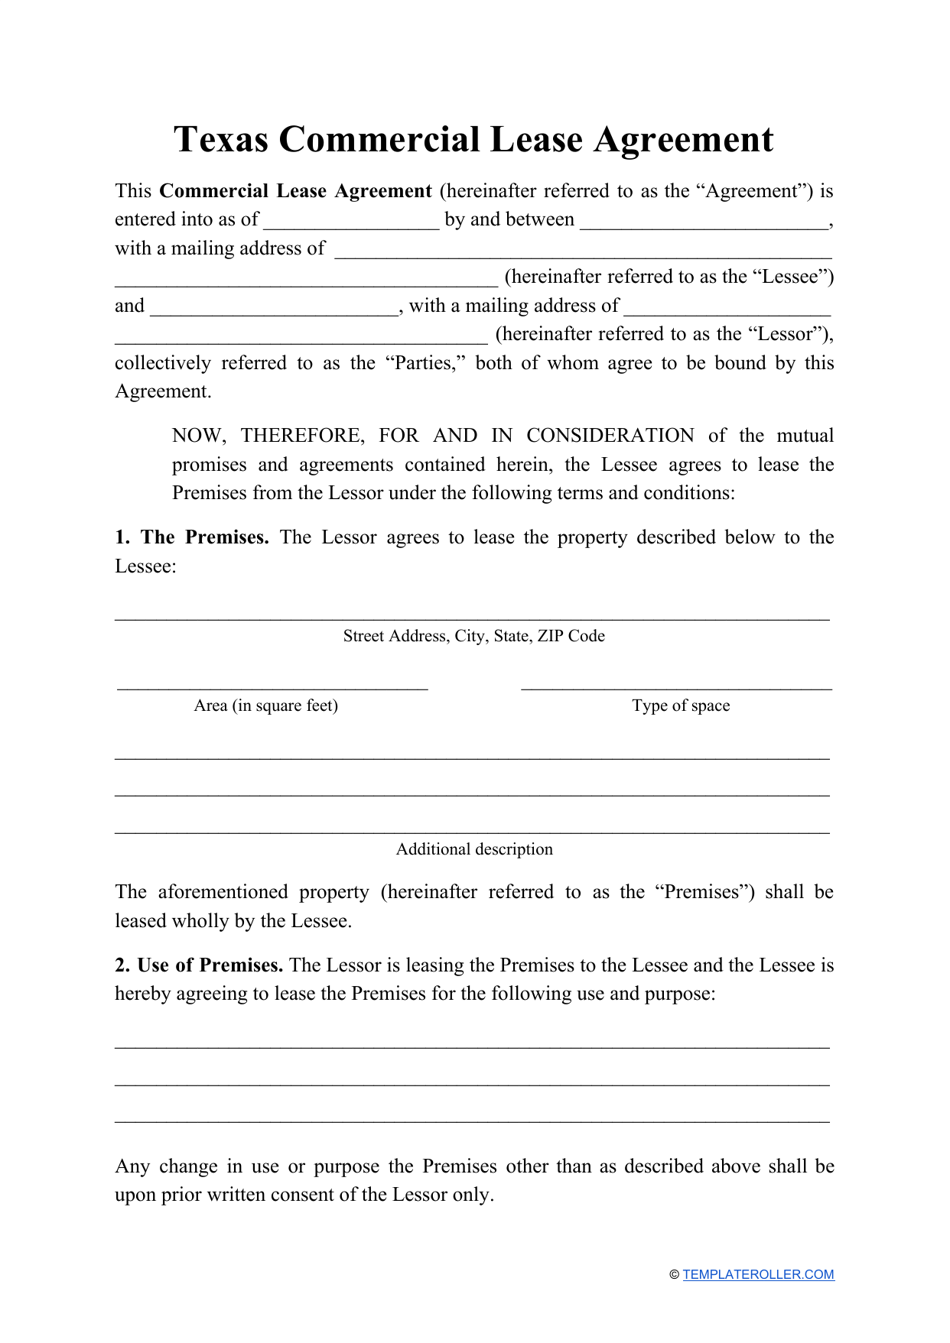 Commercial Lease Agreement Template - Texas, Page 1